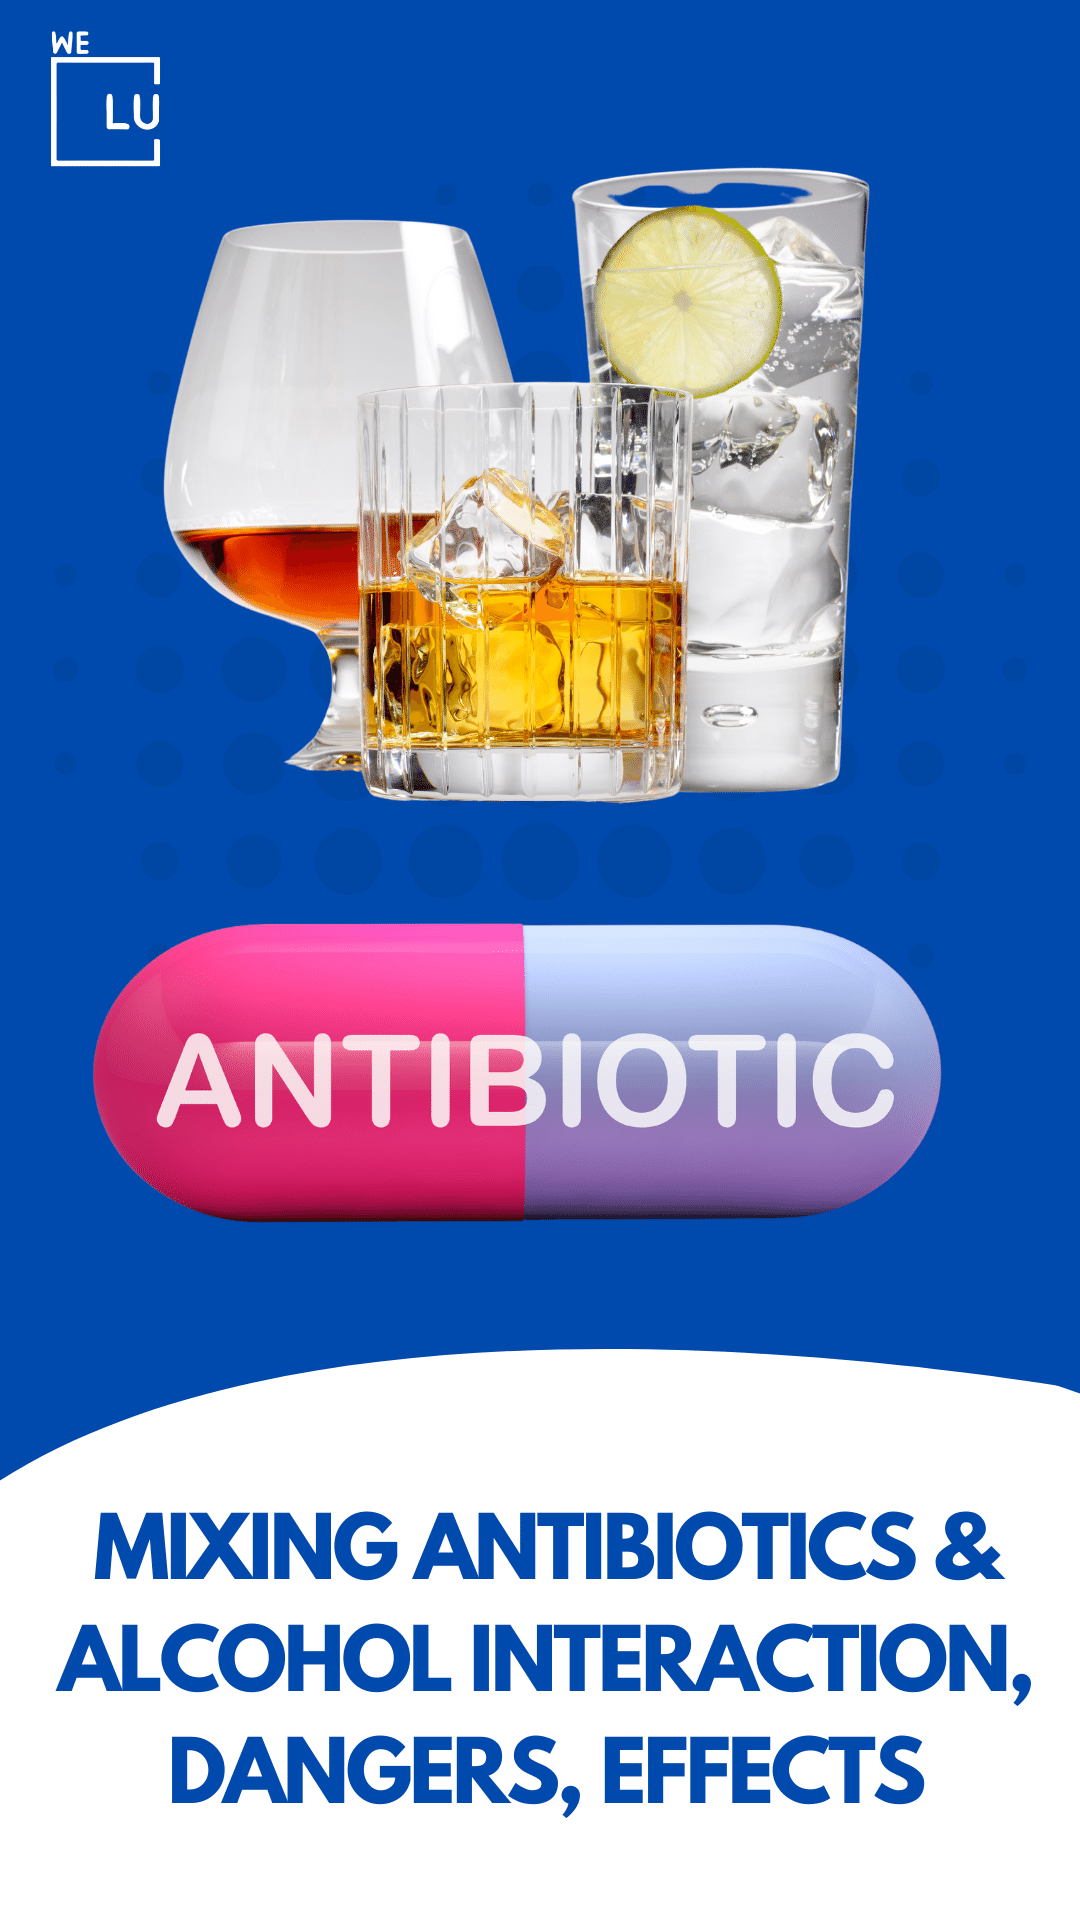 Mixing Antibiotics and Alcohol Interaction, Dangers, Effects